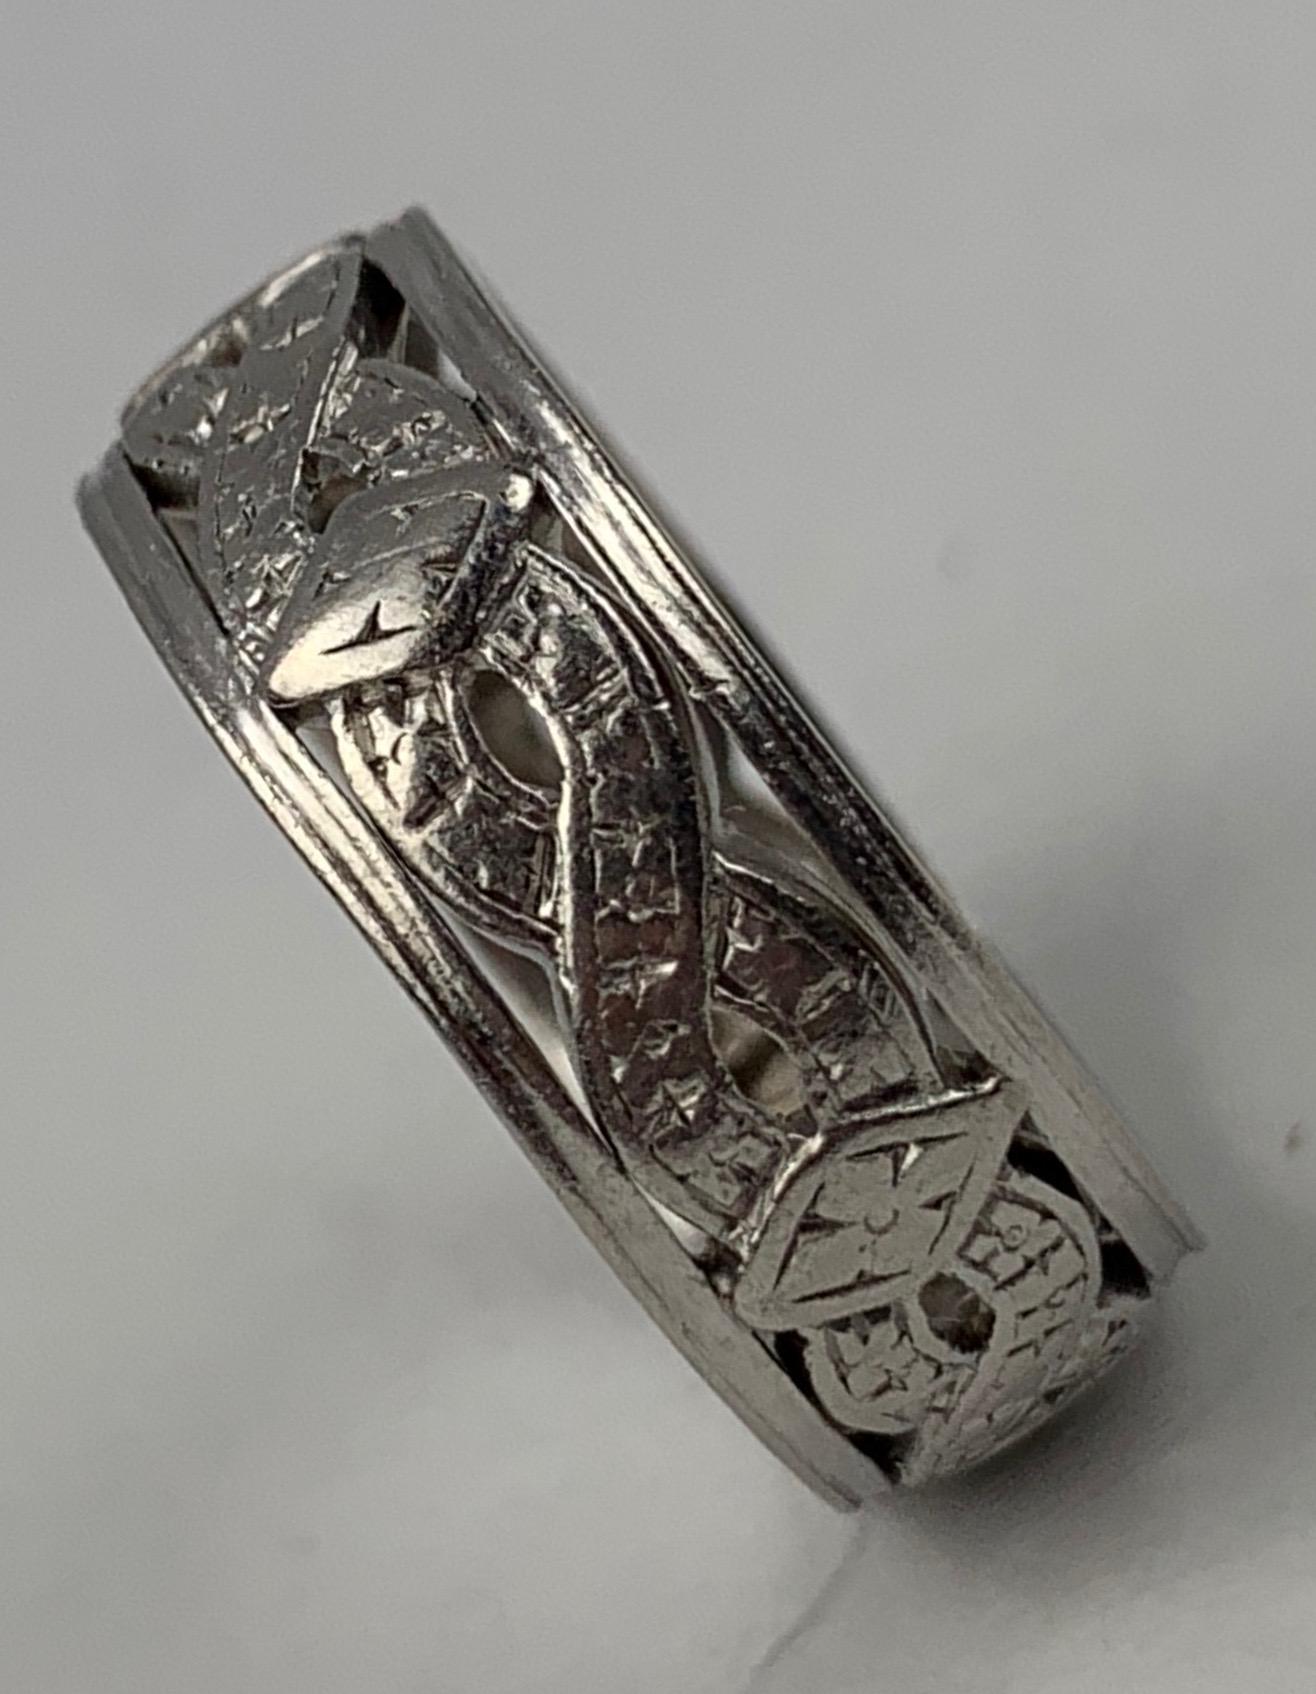 Created for a wedding in 1941 this platinum wedding band has a design of criss crossed bands with a diamond shape at every other intersecting point.  Marked on the inside 